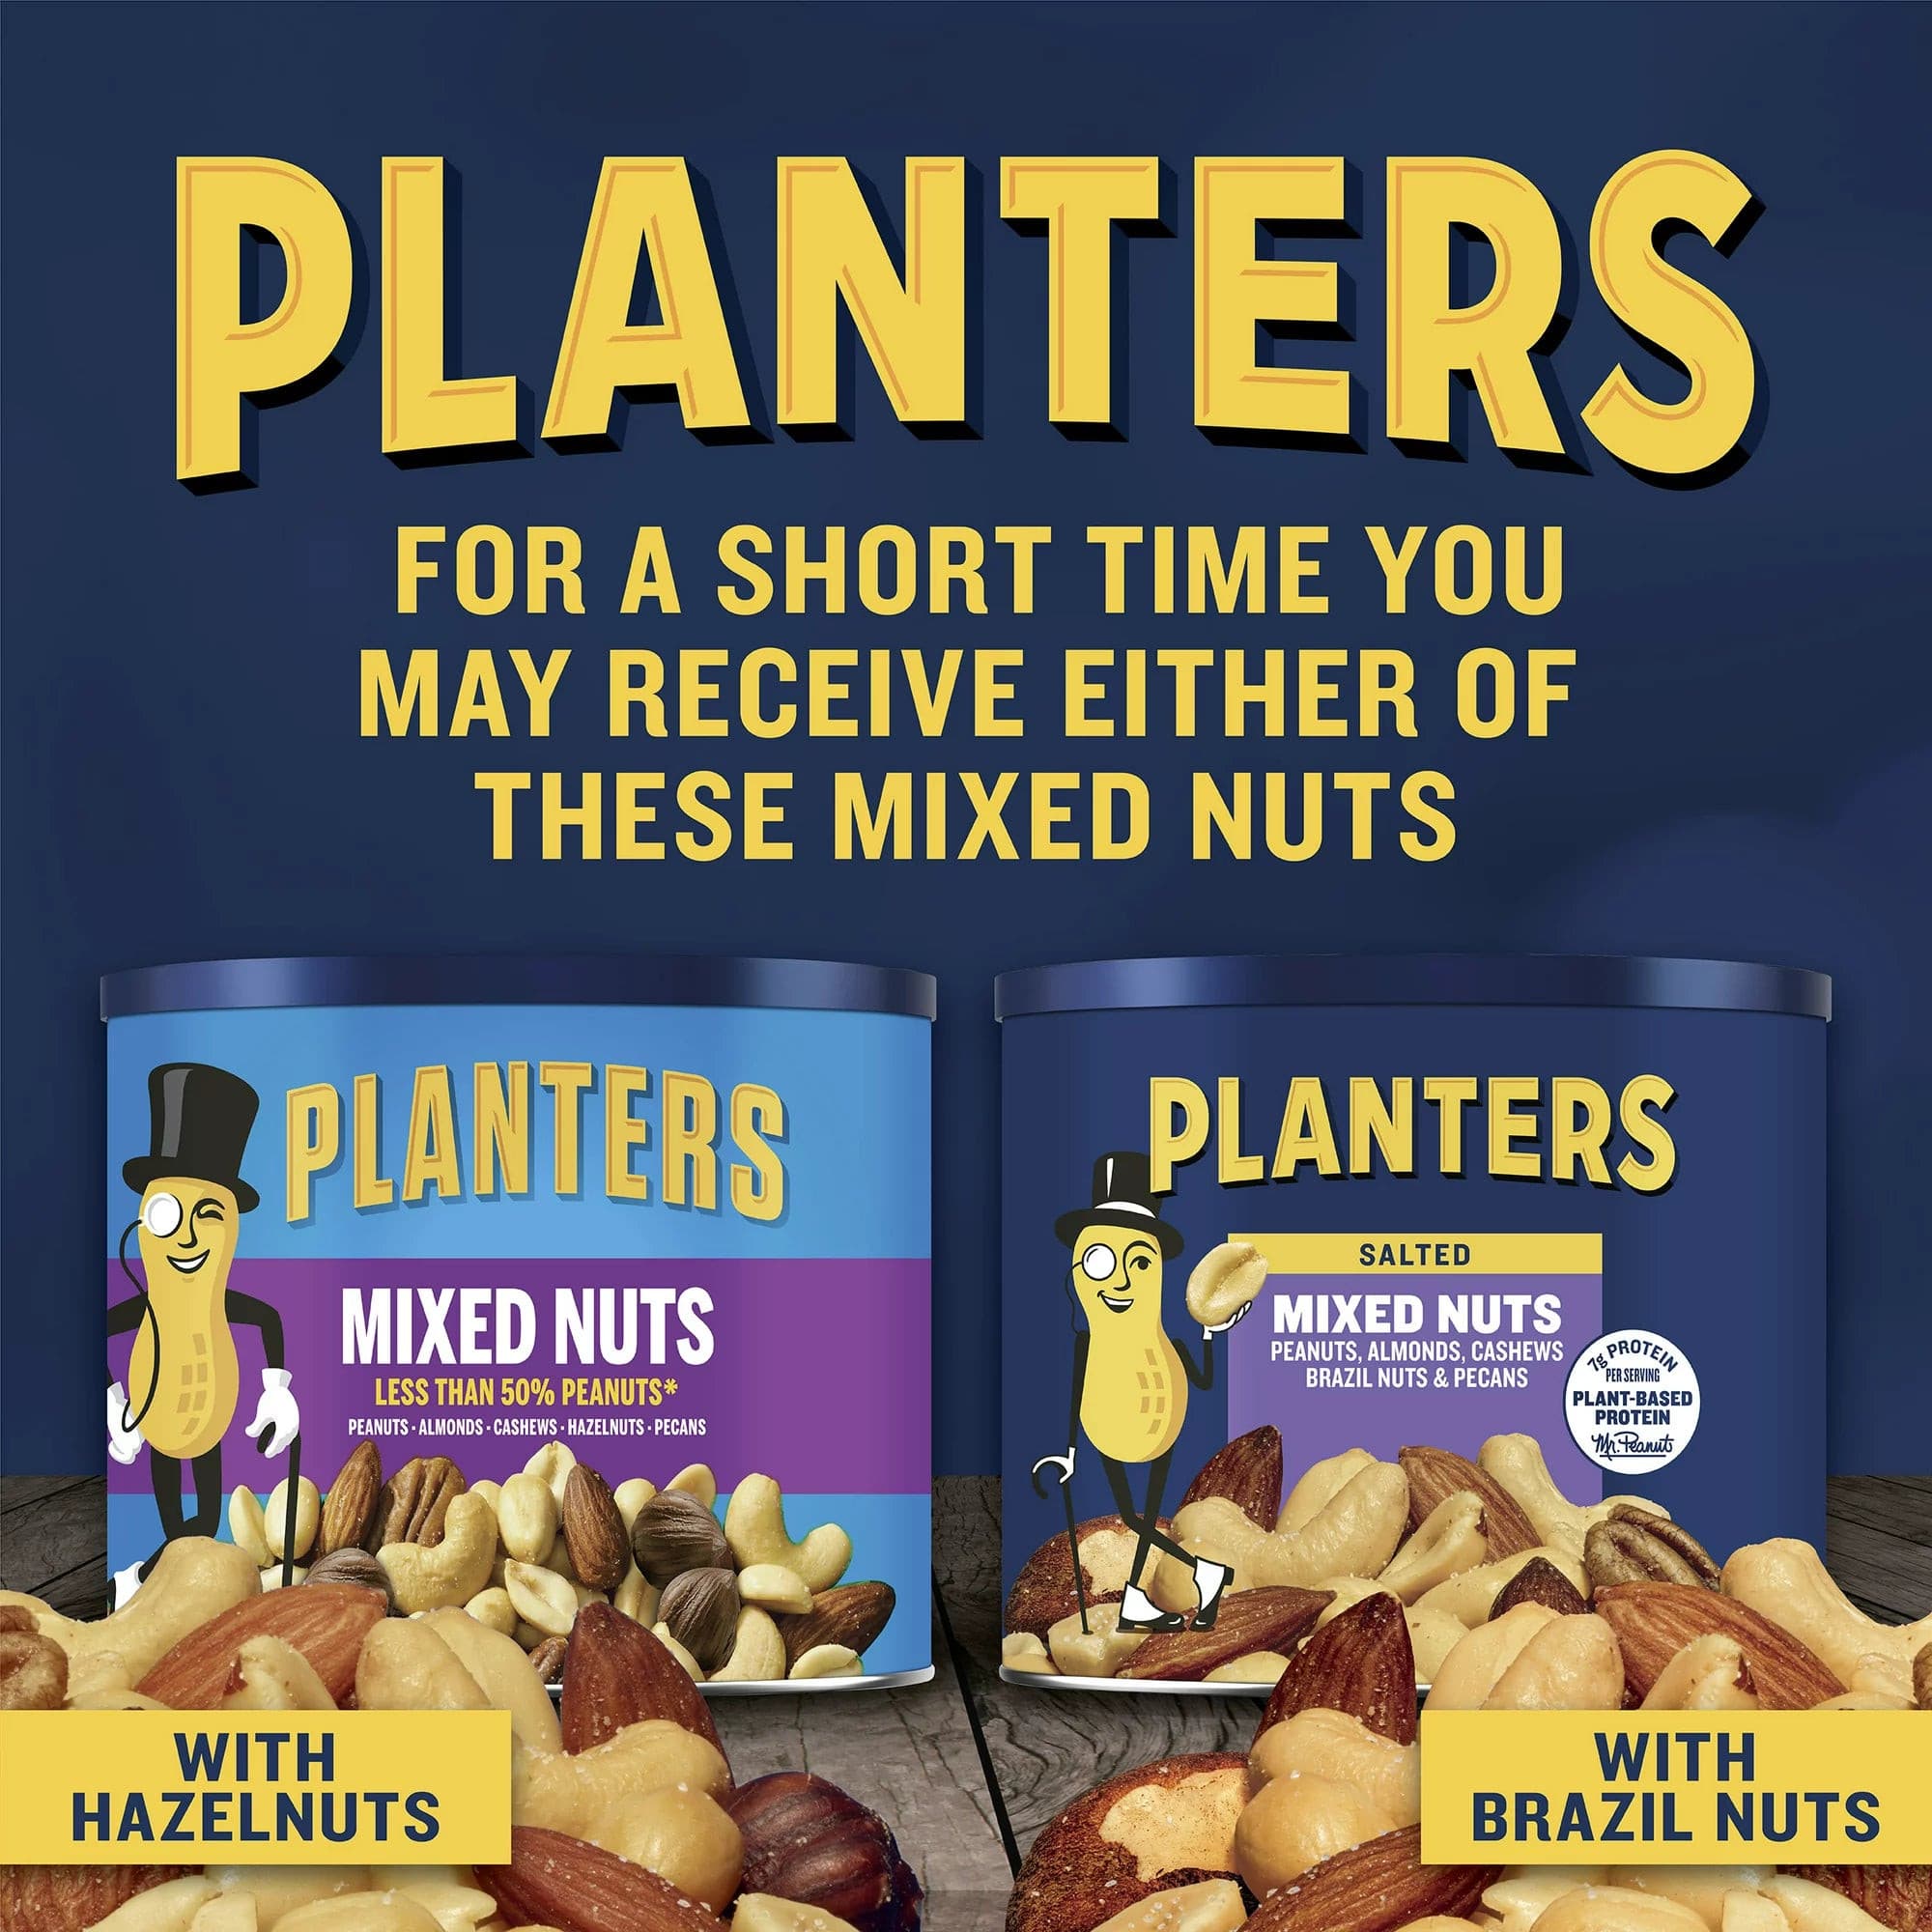 Planters Mixed Nuts Less Than 50%, 10.3 oz.